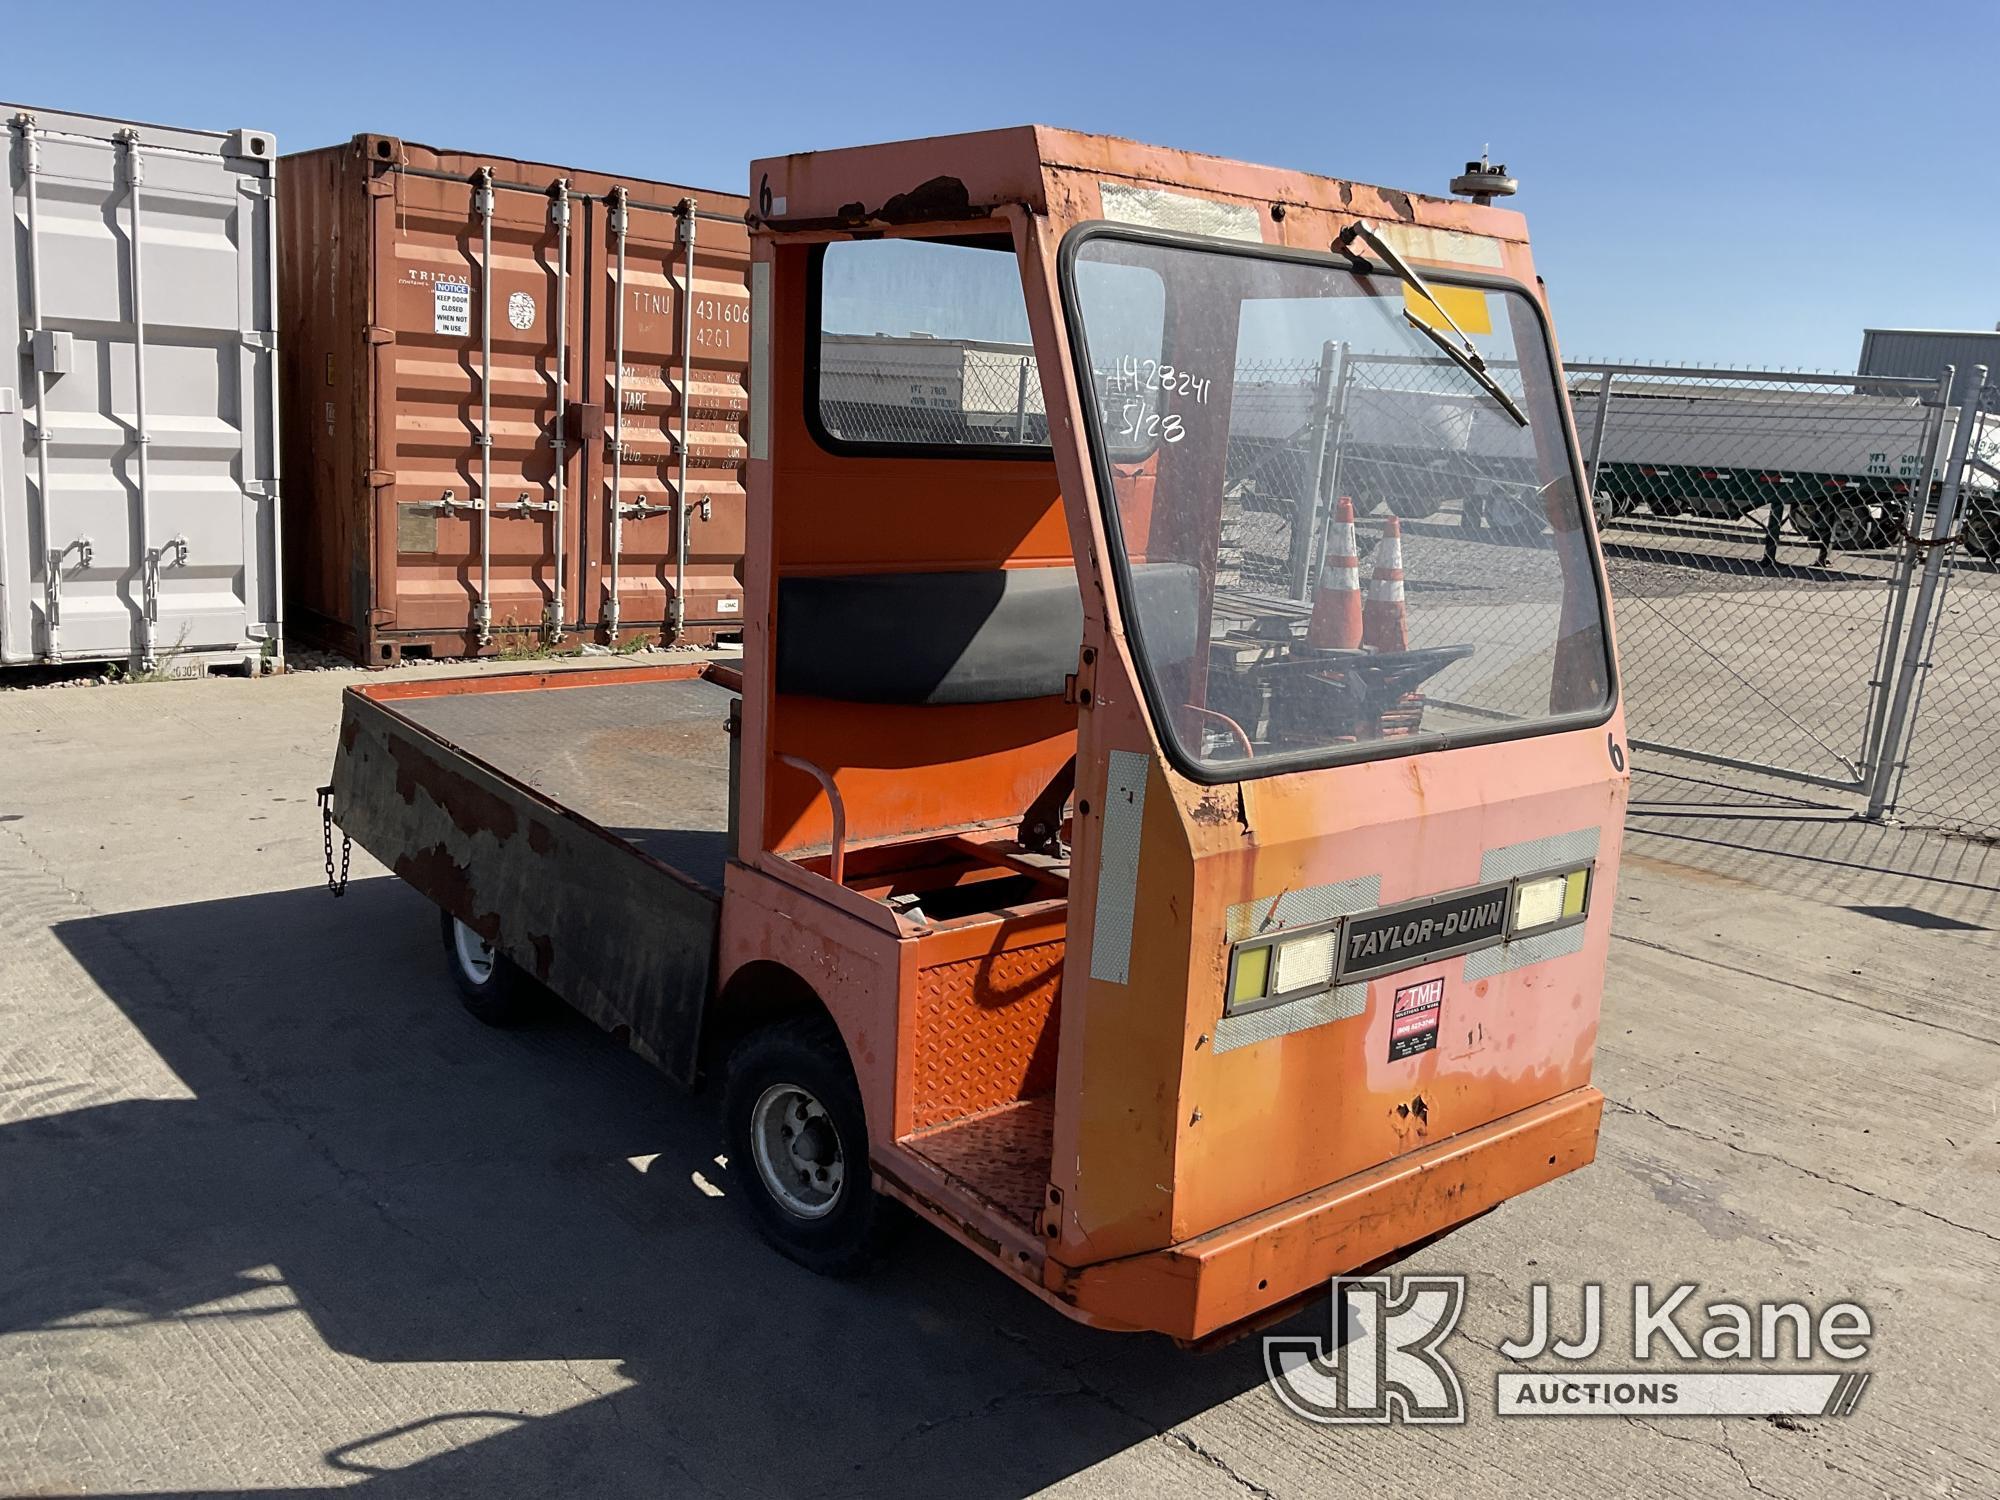 (Dixon, CA) B2-48 Utility Cart, Taylor Dunn Cart Does Not Operate & Conditions Unknown